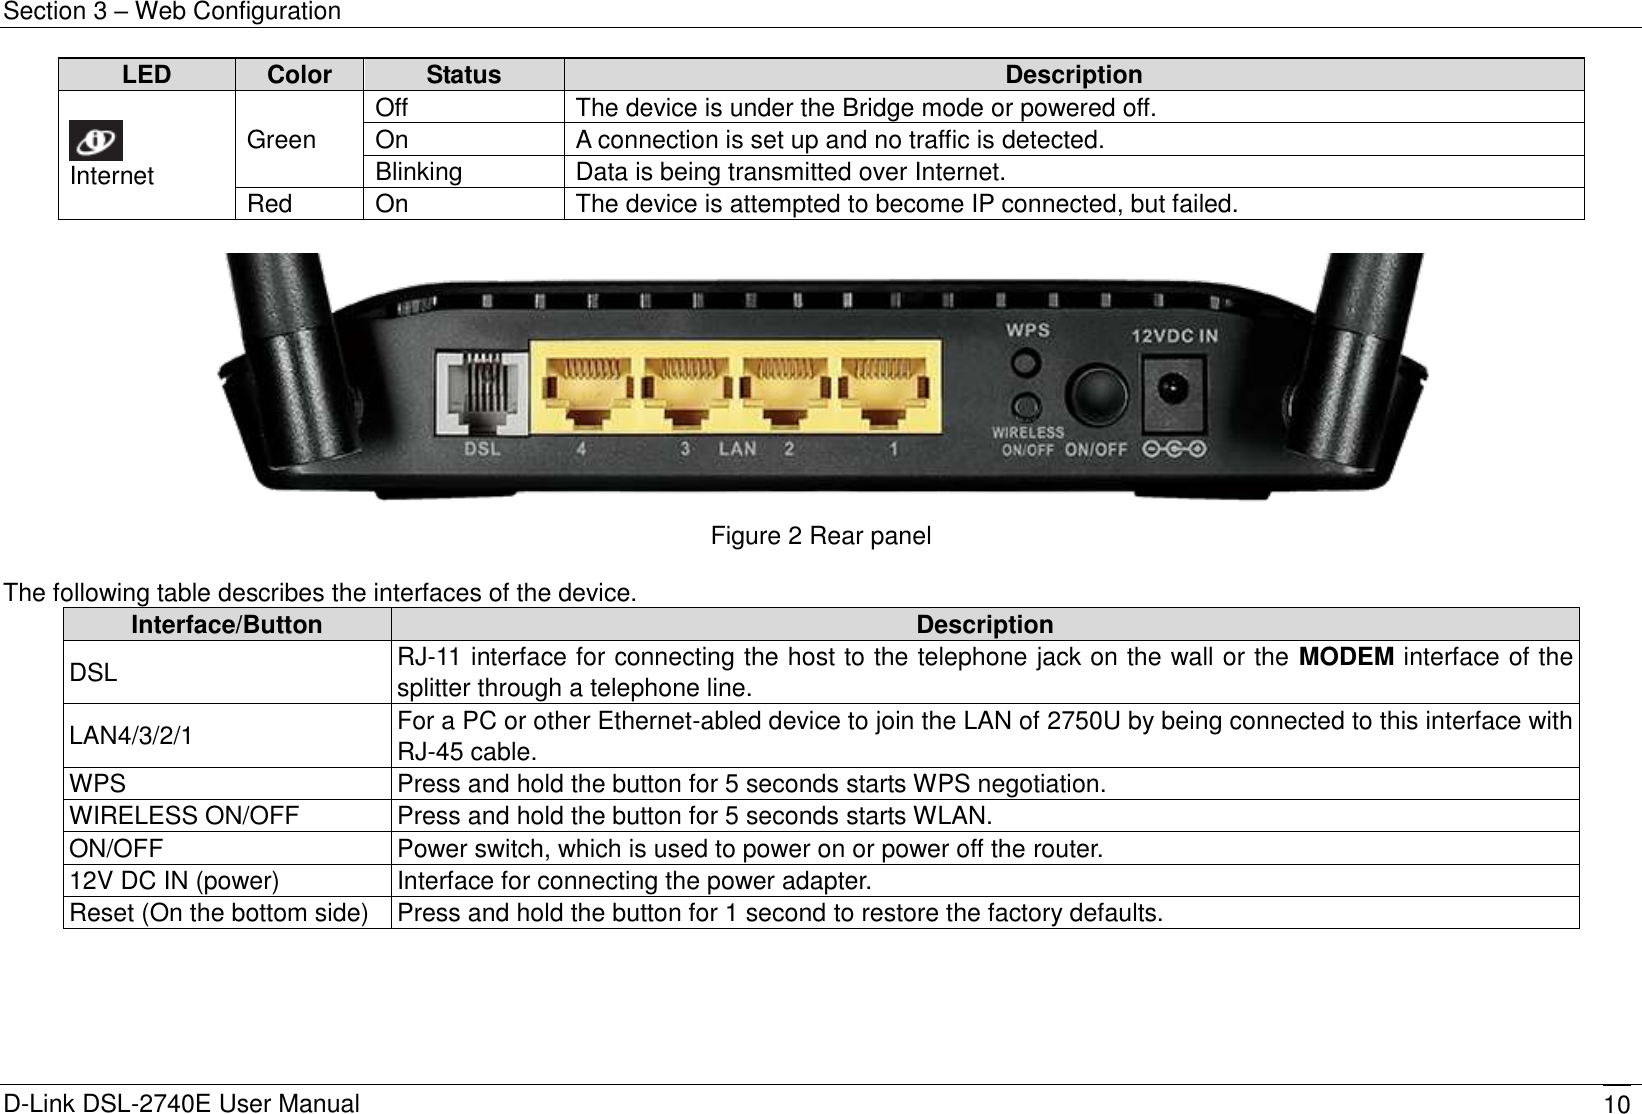 Section 3 – Web Configuration D-Link DSL-2740E User Manual 10 LED Color Status Description  Internet Green Off The device is under the Bridge mode or powered off. On A connection is set up and no traffic is detected. Blinking Data is being transmitted over Internet. Red On The device is attempted to become IP connected, but failed.   Figure 2 Rear panel  The following table describes the interfaces of the device. Interface/Button Description DSL RJ-11 interface for connecting the host to the telephone jack on the wall or the MODEM interface of the splitter through a telephone line. LAN4/3/2/1 For a PC or other Ethernet-abled device to join the LAN of 2750U by being connected to this interface with RJ-45 cable. WPS Press and hold the button for 5 seconds starts WPS negotiation. WIRELESS ON/OFF Press and hold the button for 5 seconds starts WLAN. ON/OFF Power switch, which is used to power on or power off the router. 12V DC IN (power) Interface for connecting the power adapter. Reset (On the bottom side) Press and hold the button for 1 second to restore the factory defaults.   